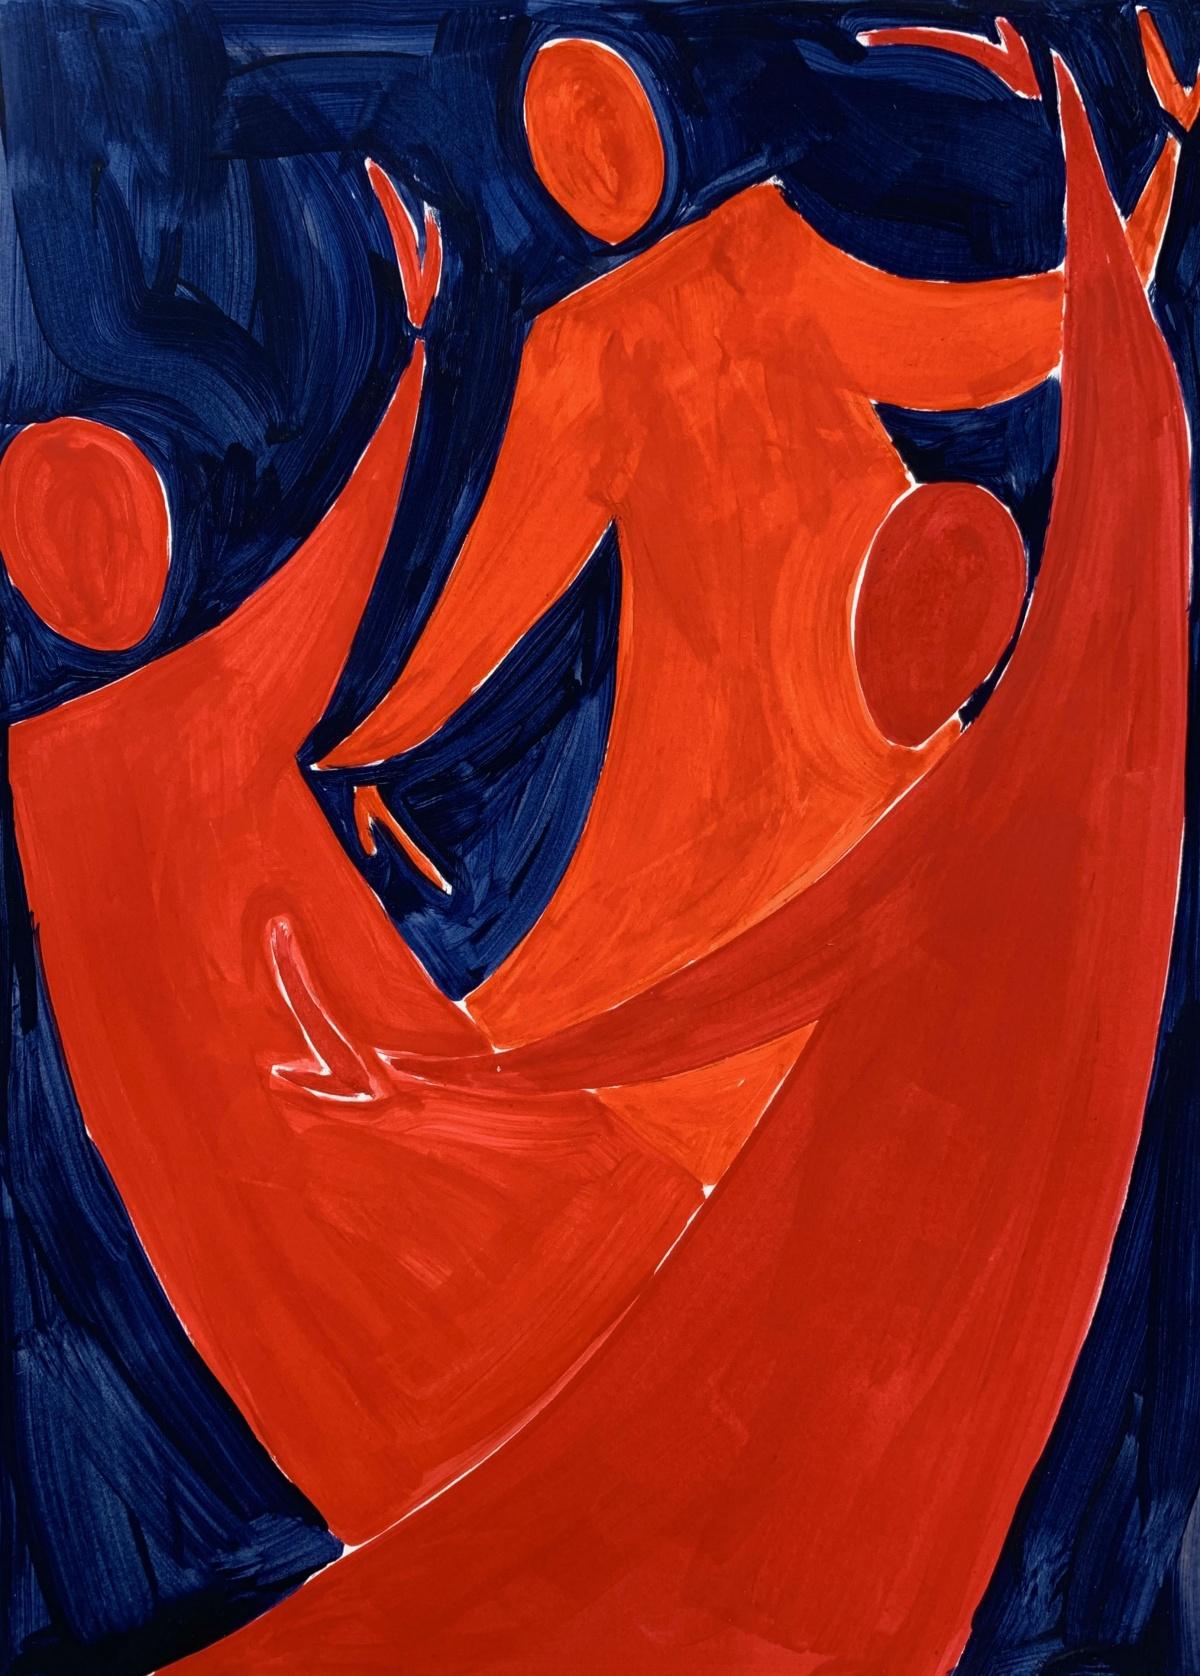 A dance - Figurative Painting on Paper, Young art, Colorful, Vibrant